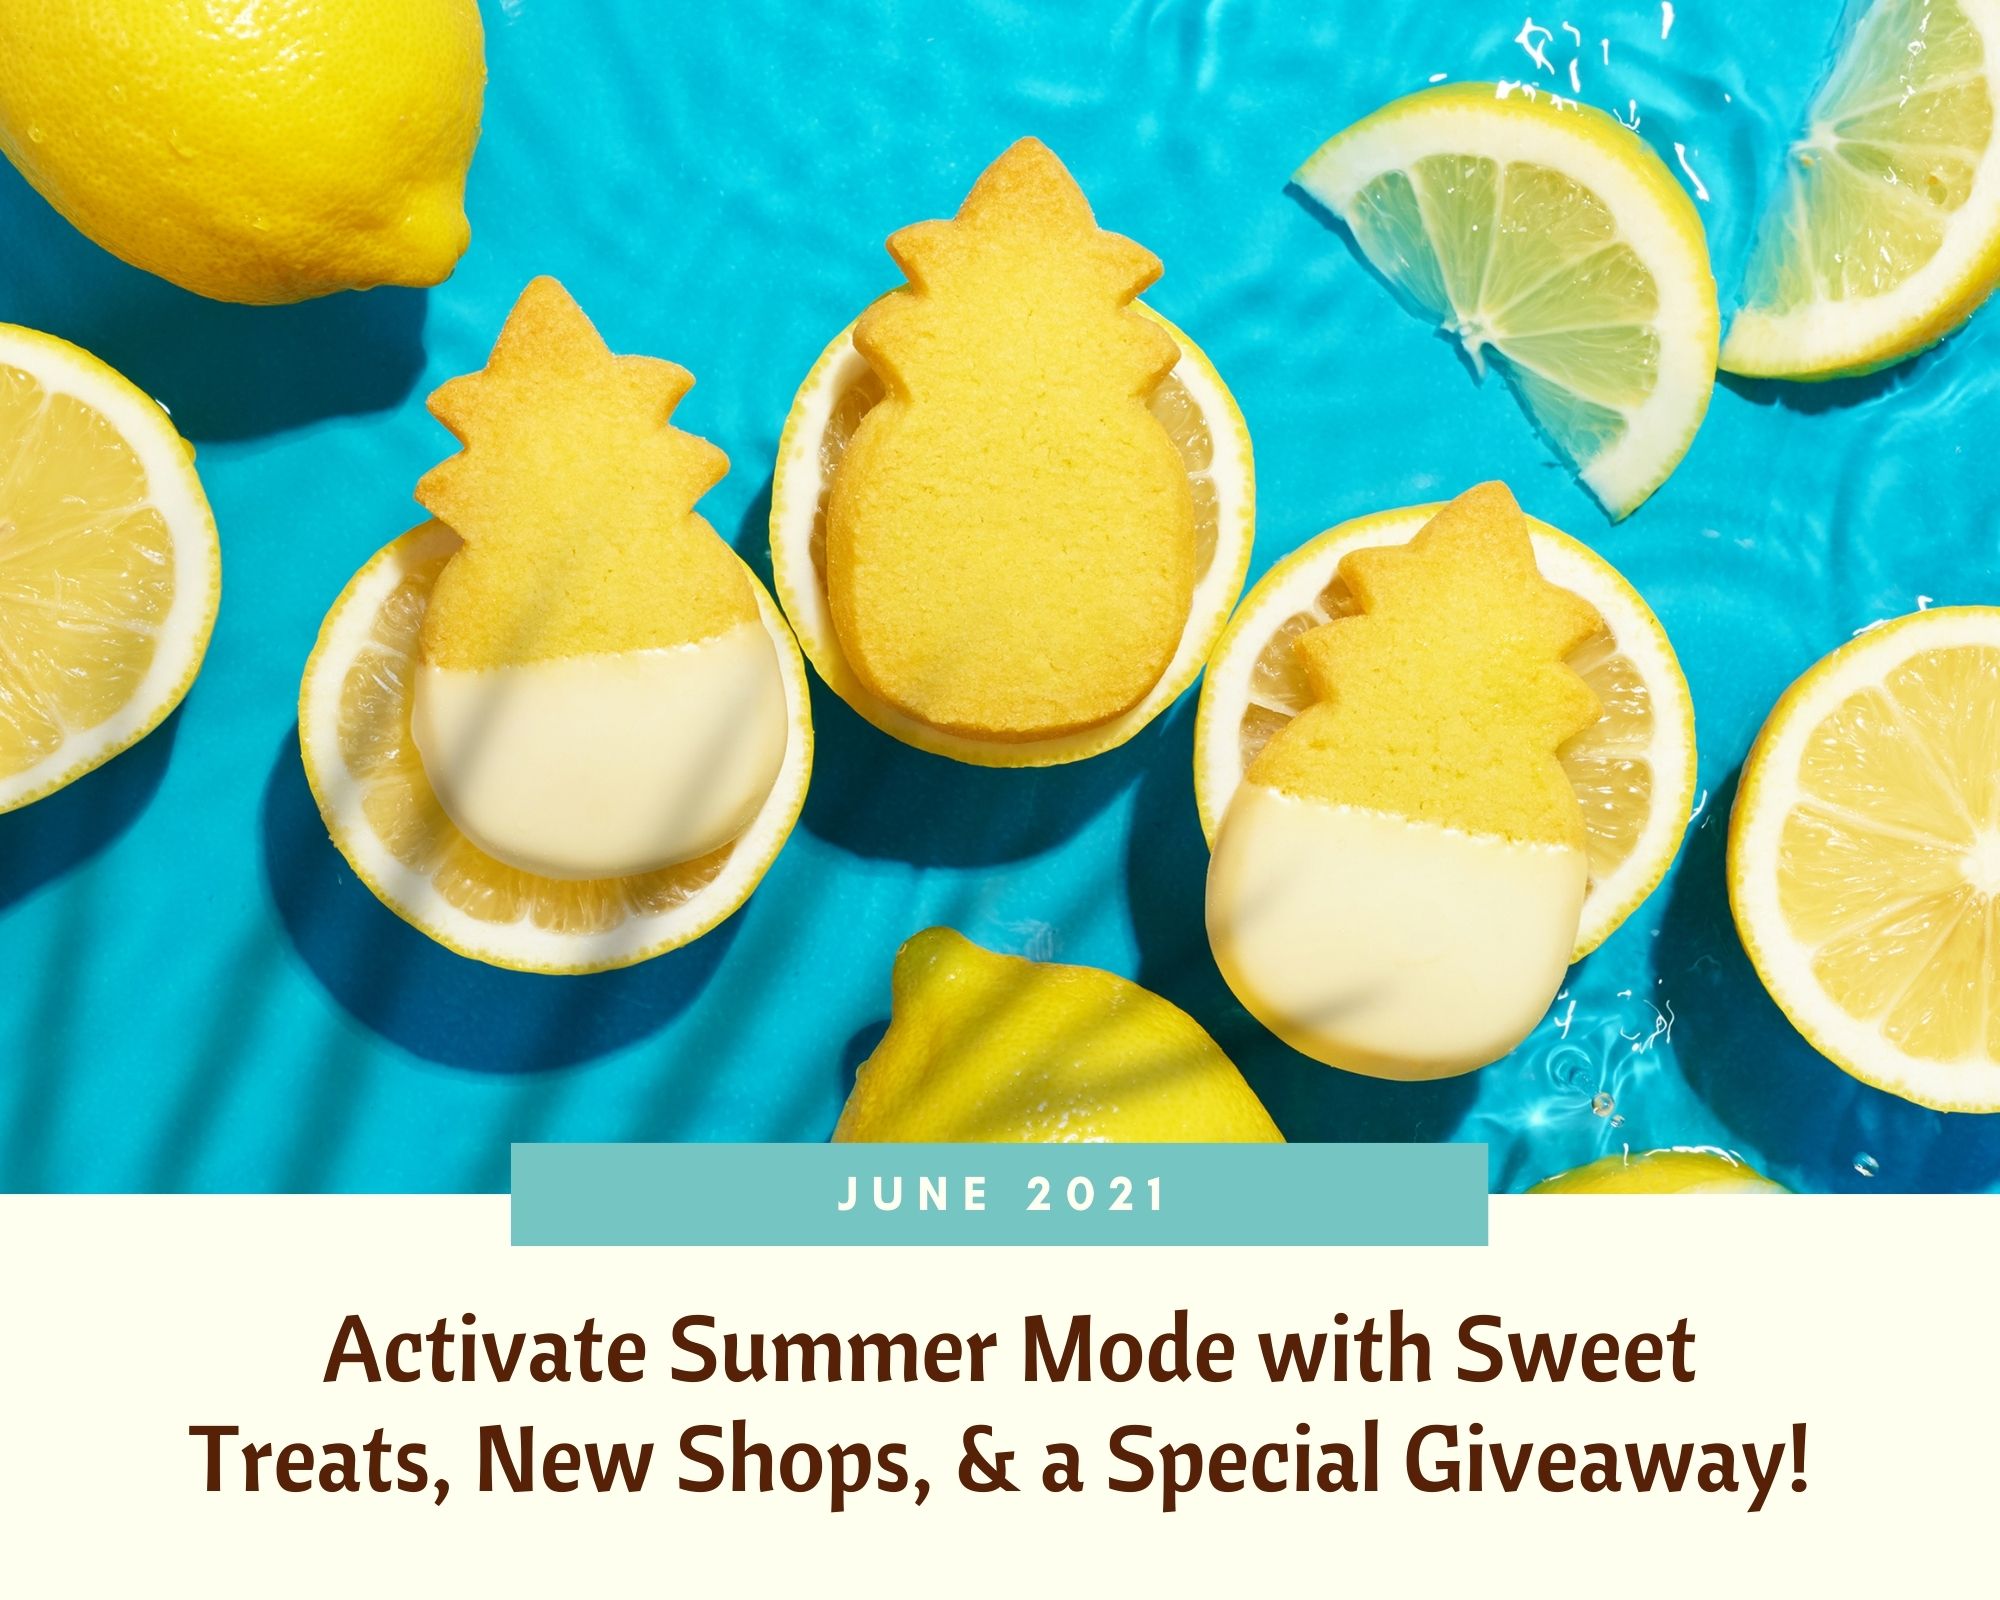 June 2021: Activate Summer Mode with Sweet Treats, New Shops, & a Special Giveaway!